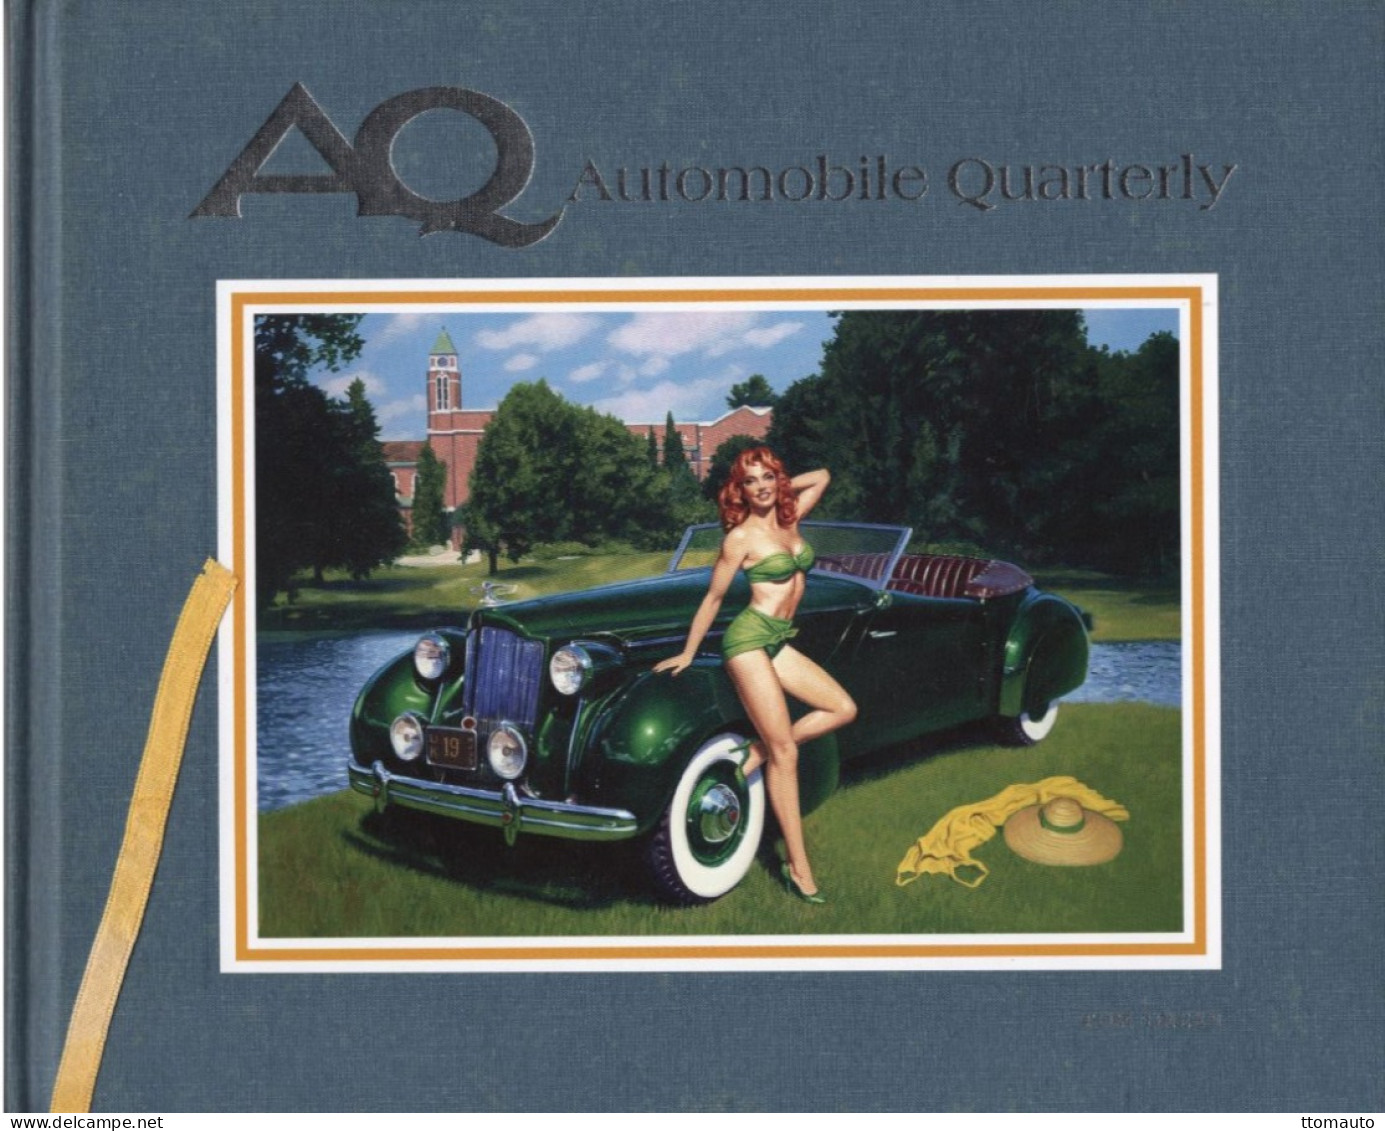 Automobile Quarterly Volume 48 Number 2 (Apr 2008) - Delage-Austin FX4-Lanchester - FREE SHIPPING TO EUROPE & US - Transport